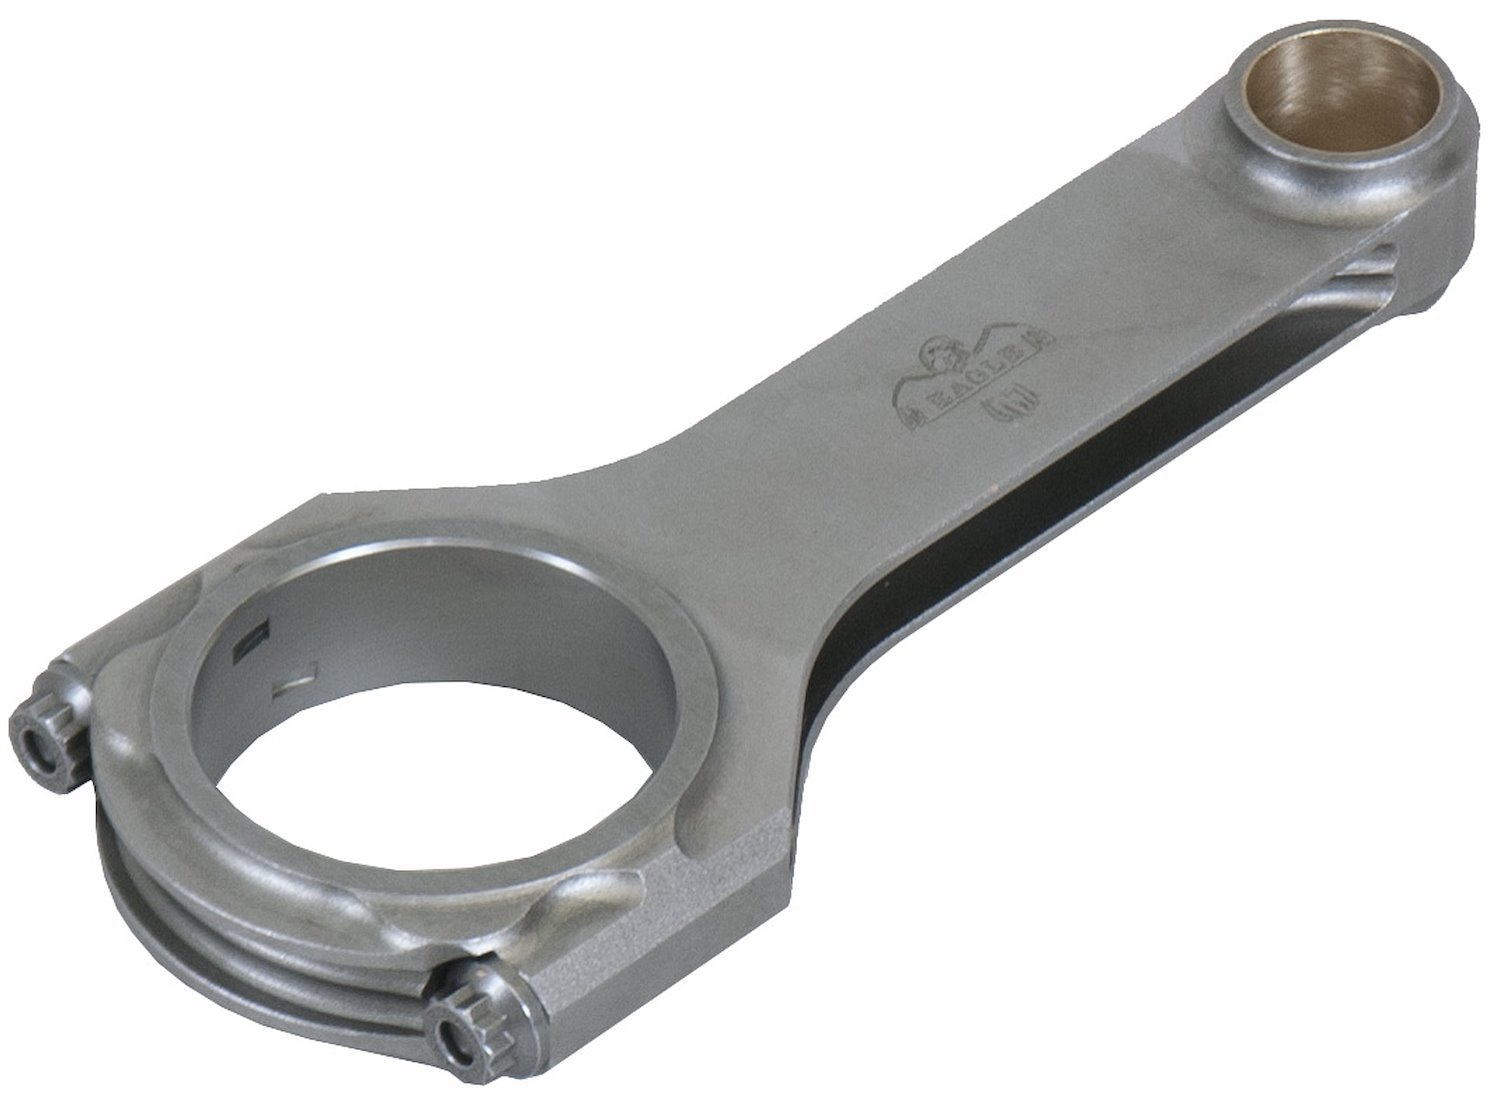 CRS63854D-1 H-Beam 4th Generation Design (4D) 6.385 in. Forged Steel Connecting Rod for Chevy Big Block Engines